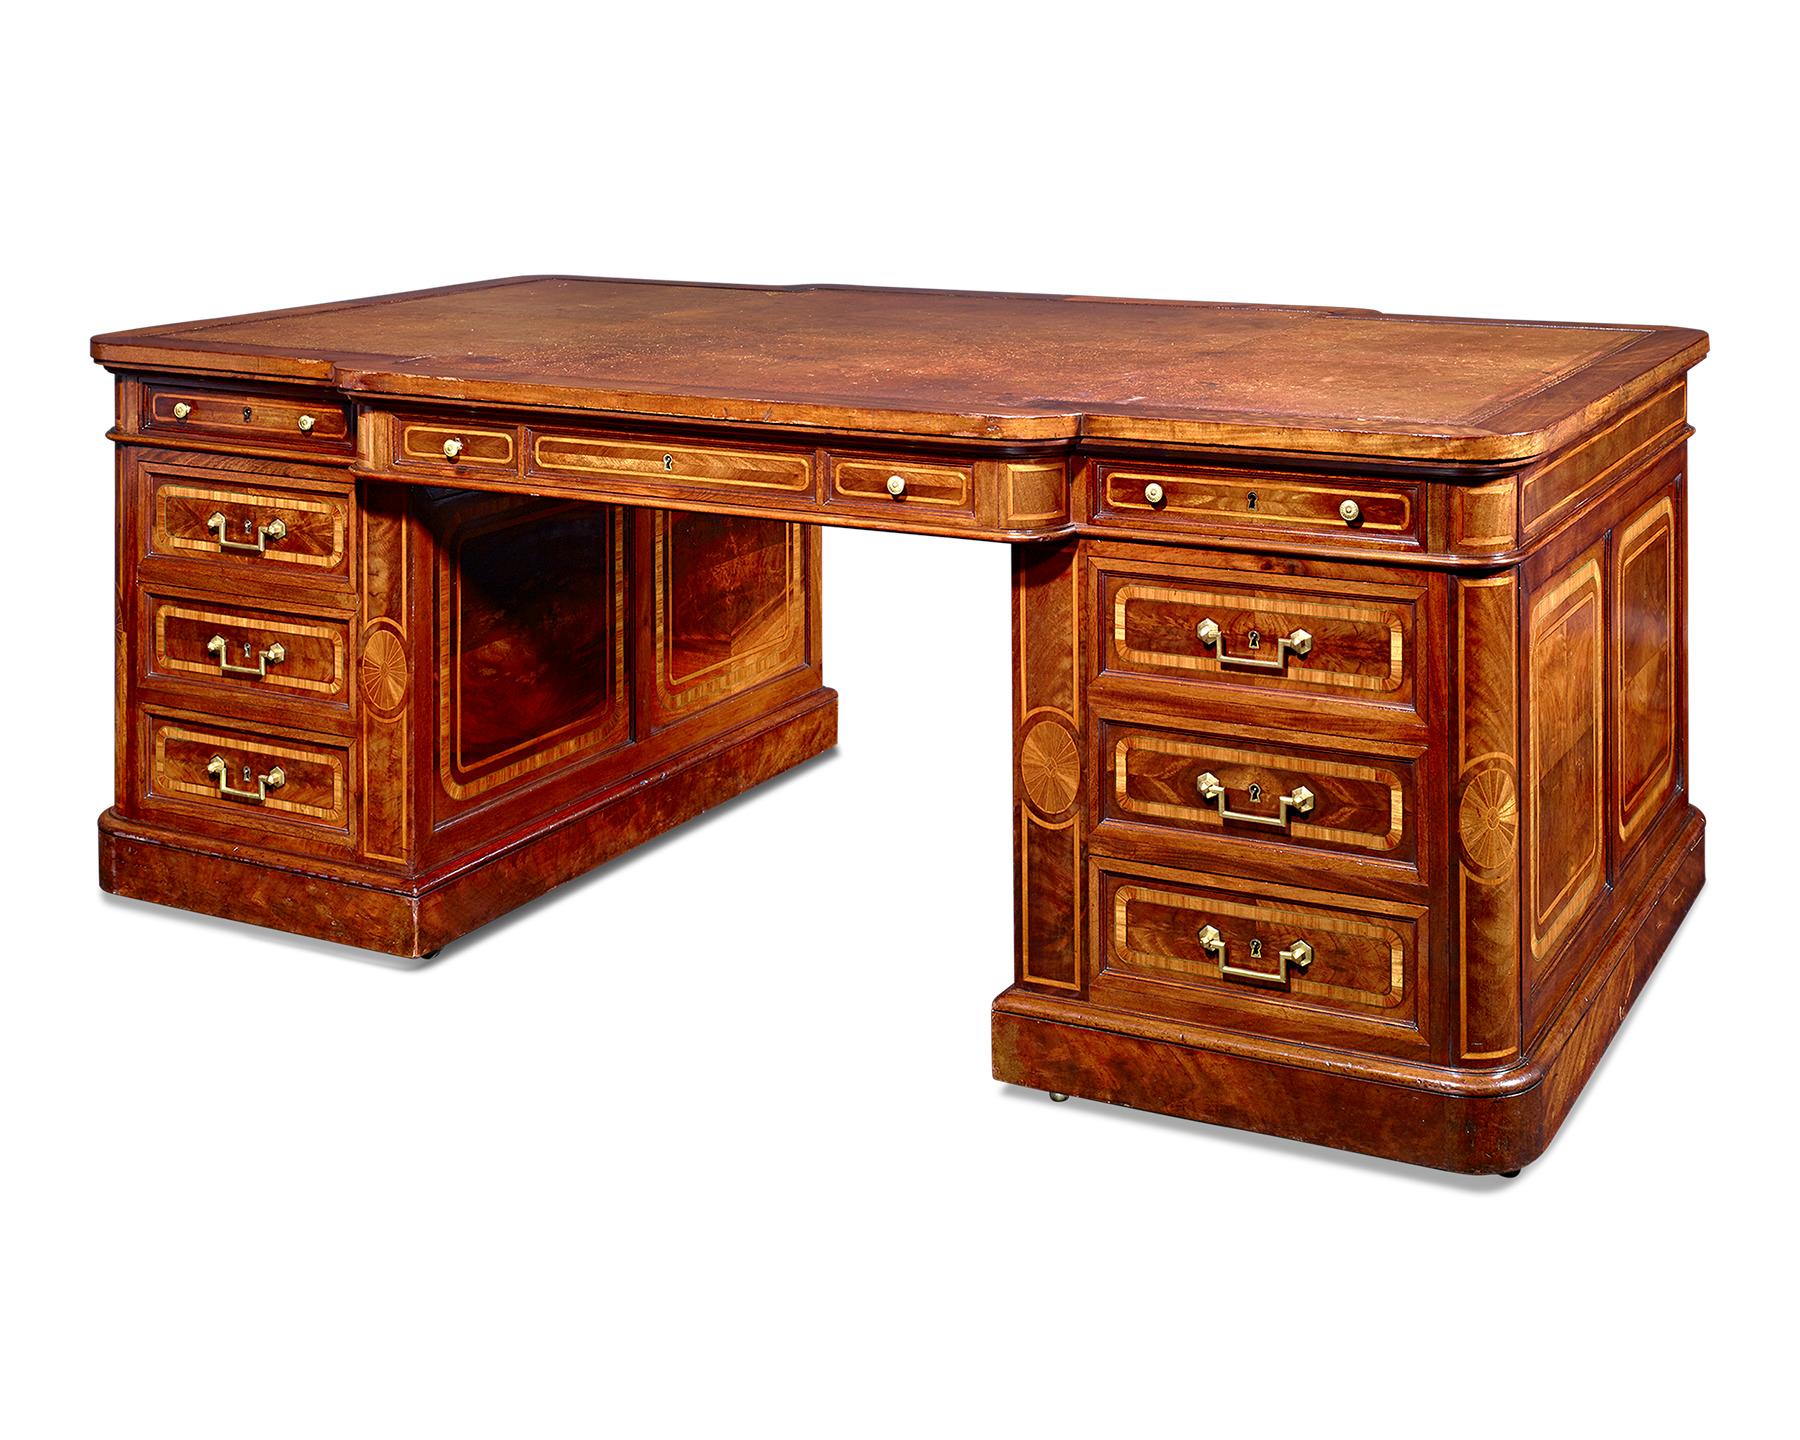 Conducting business was surely a pleasure at this imposing French partner's desk. Crafted of mahogany, the impressive desk is ingeniously designed to seat business partners directly across from each other, with drawers and ample space on each side